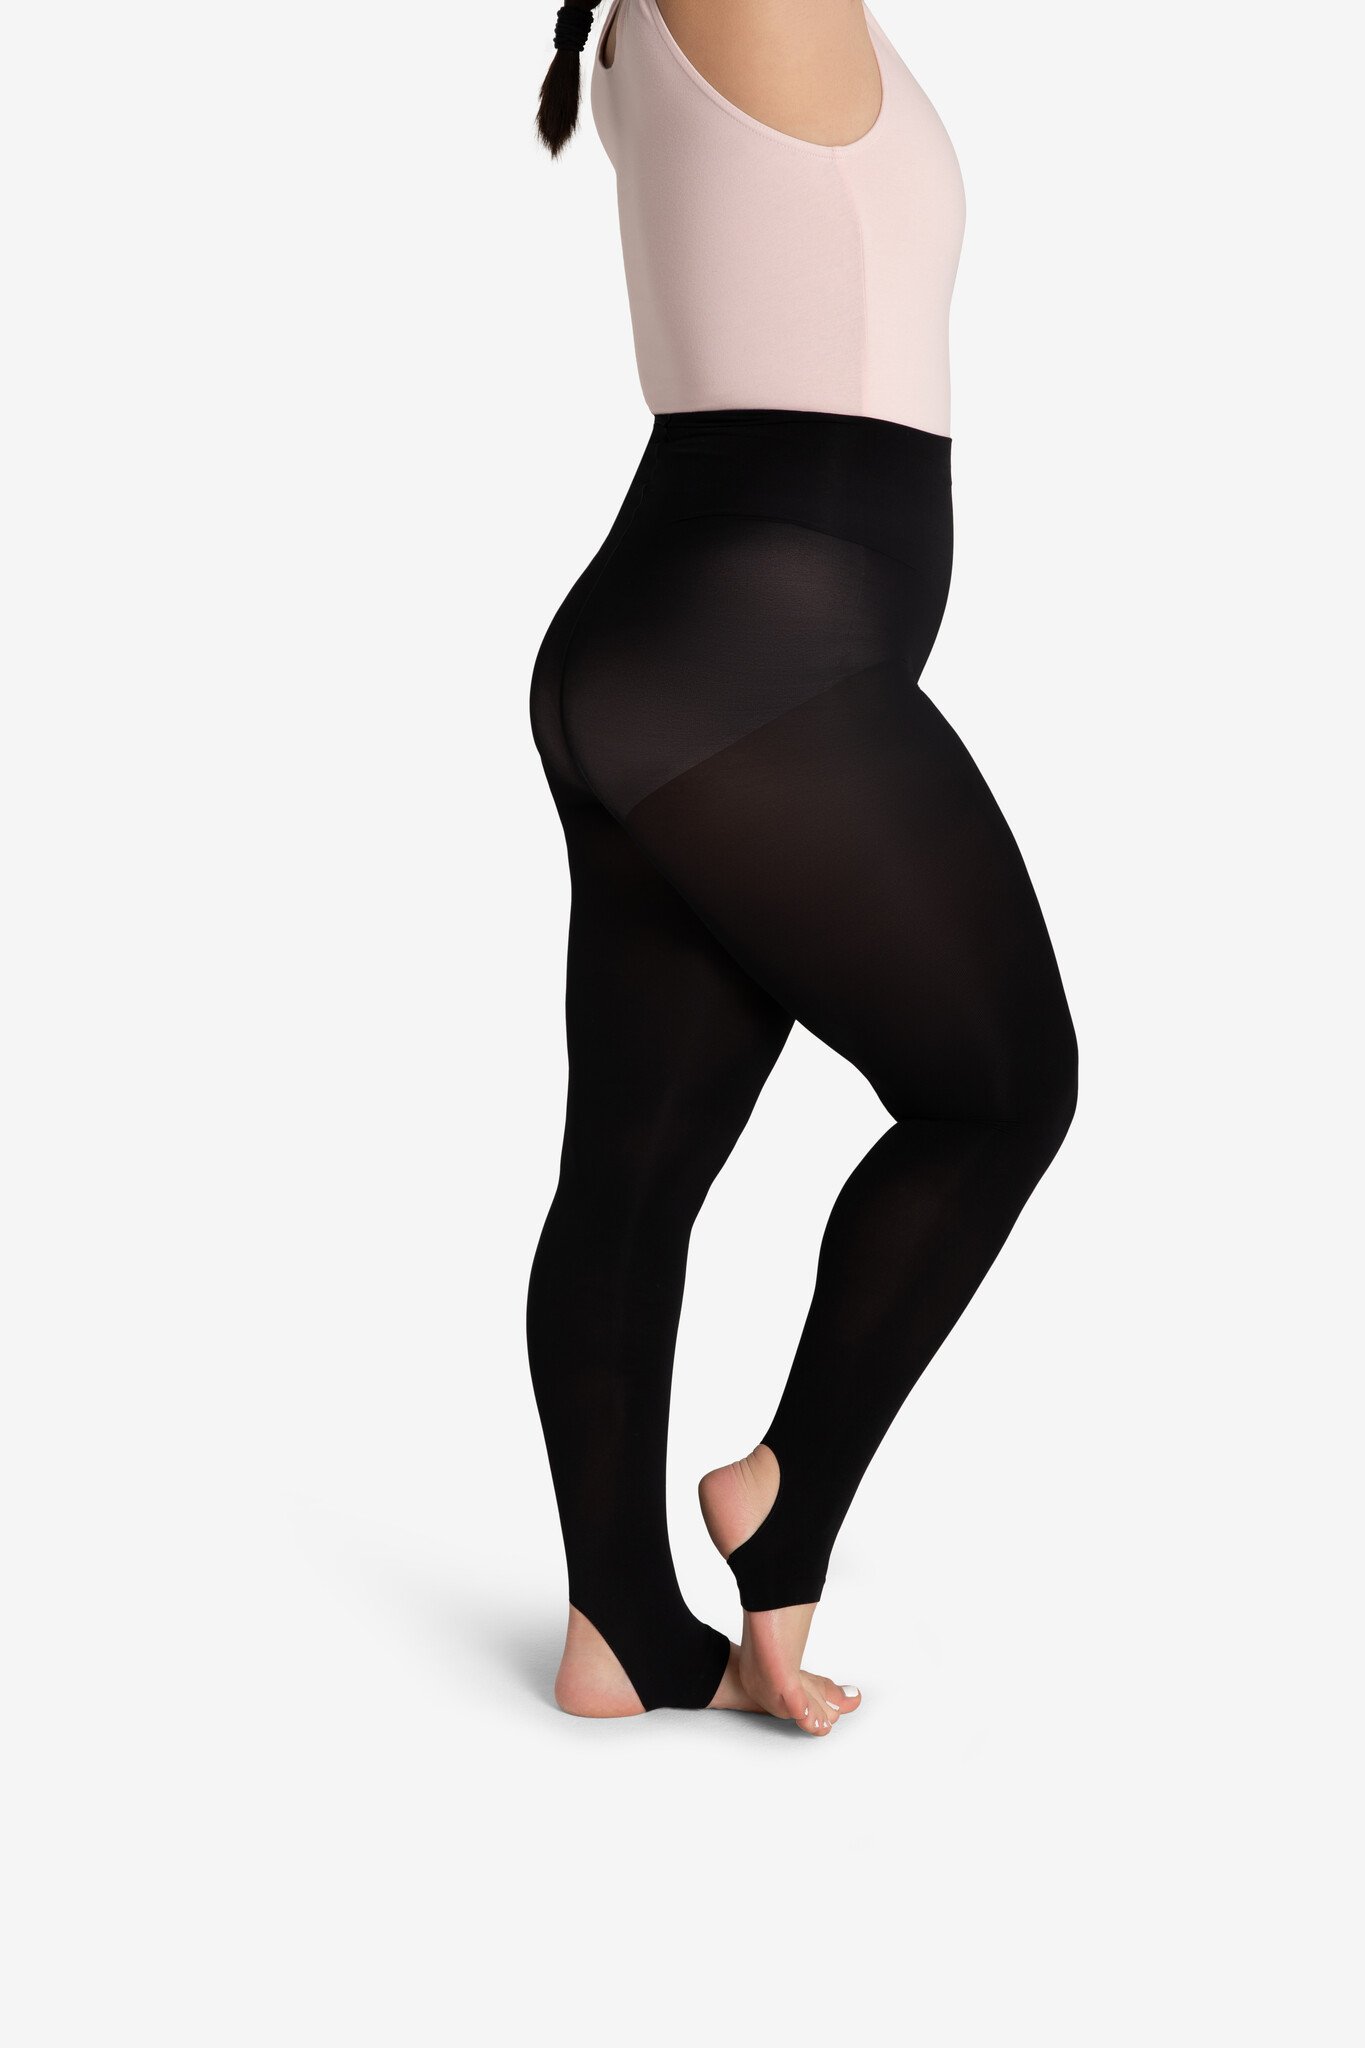 Gaynor Minden Adult Mesh Seamed Convertible Tights - The DanceWEAR Shoppe